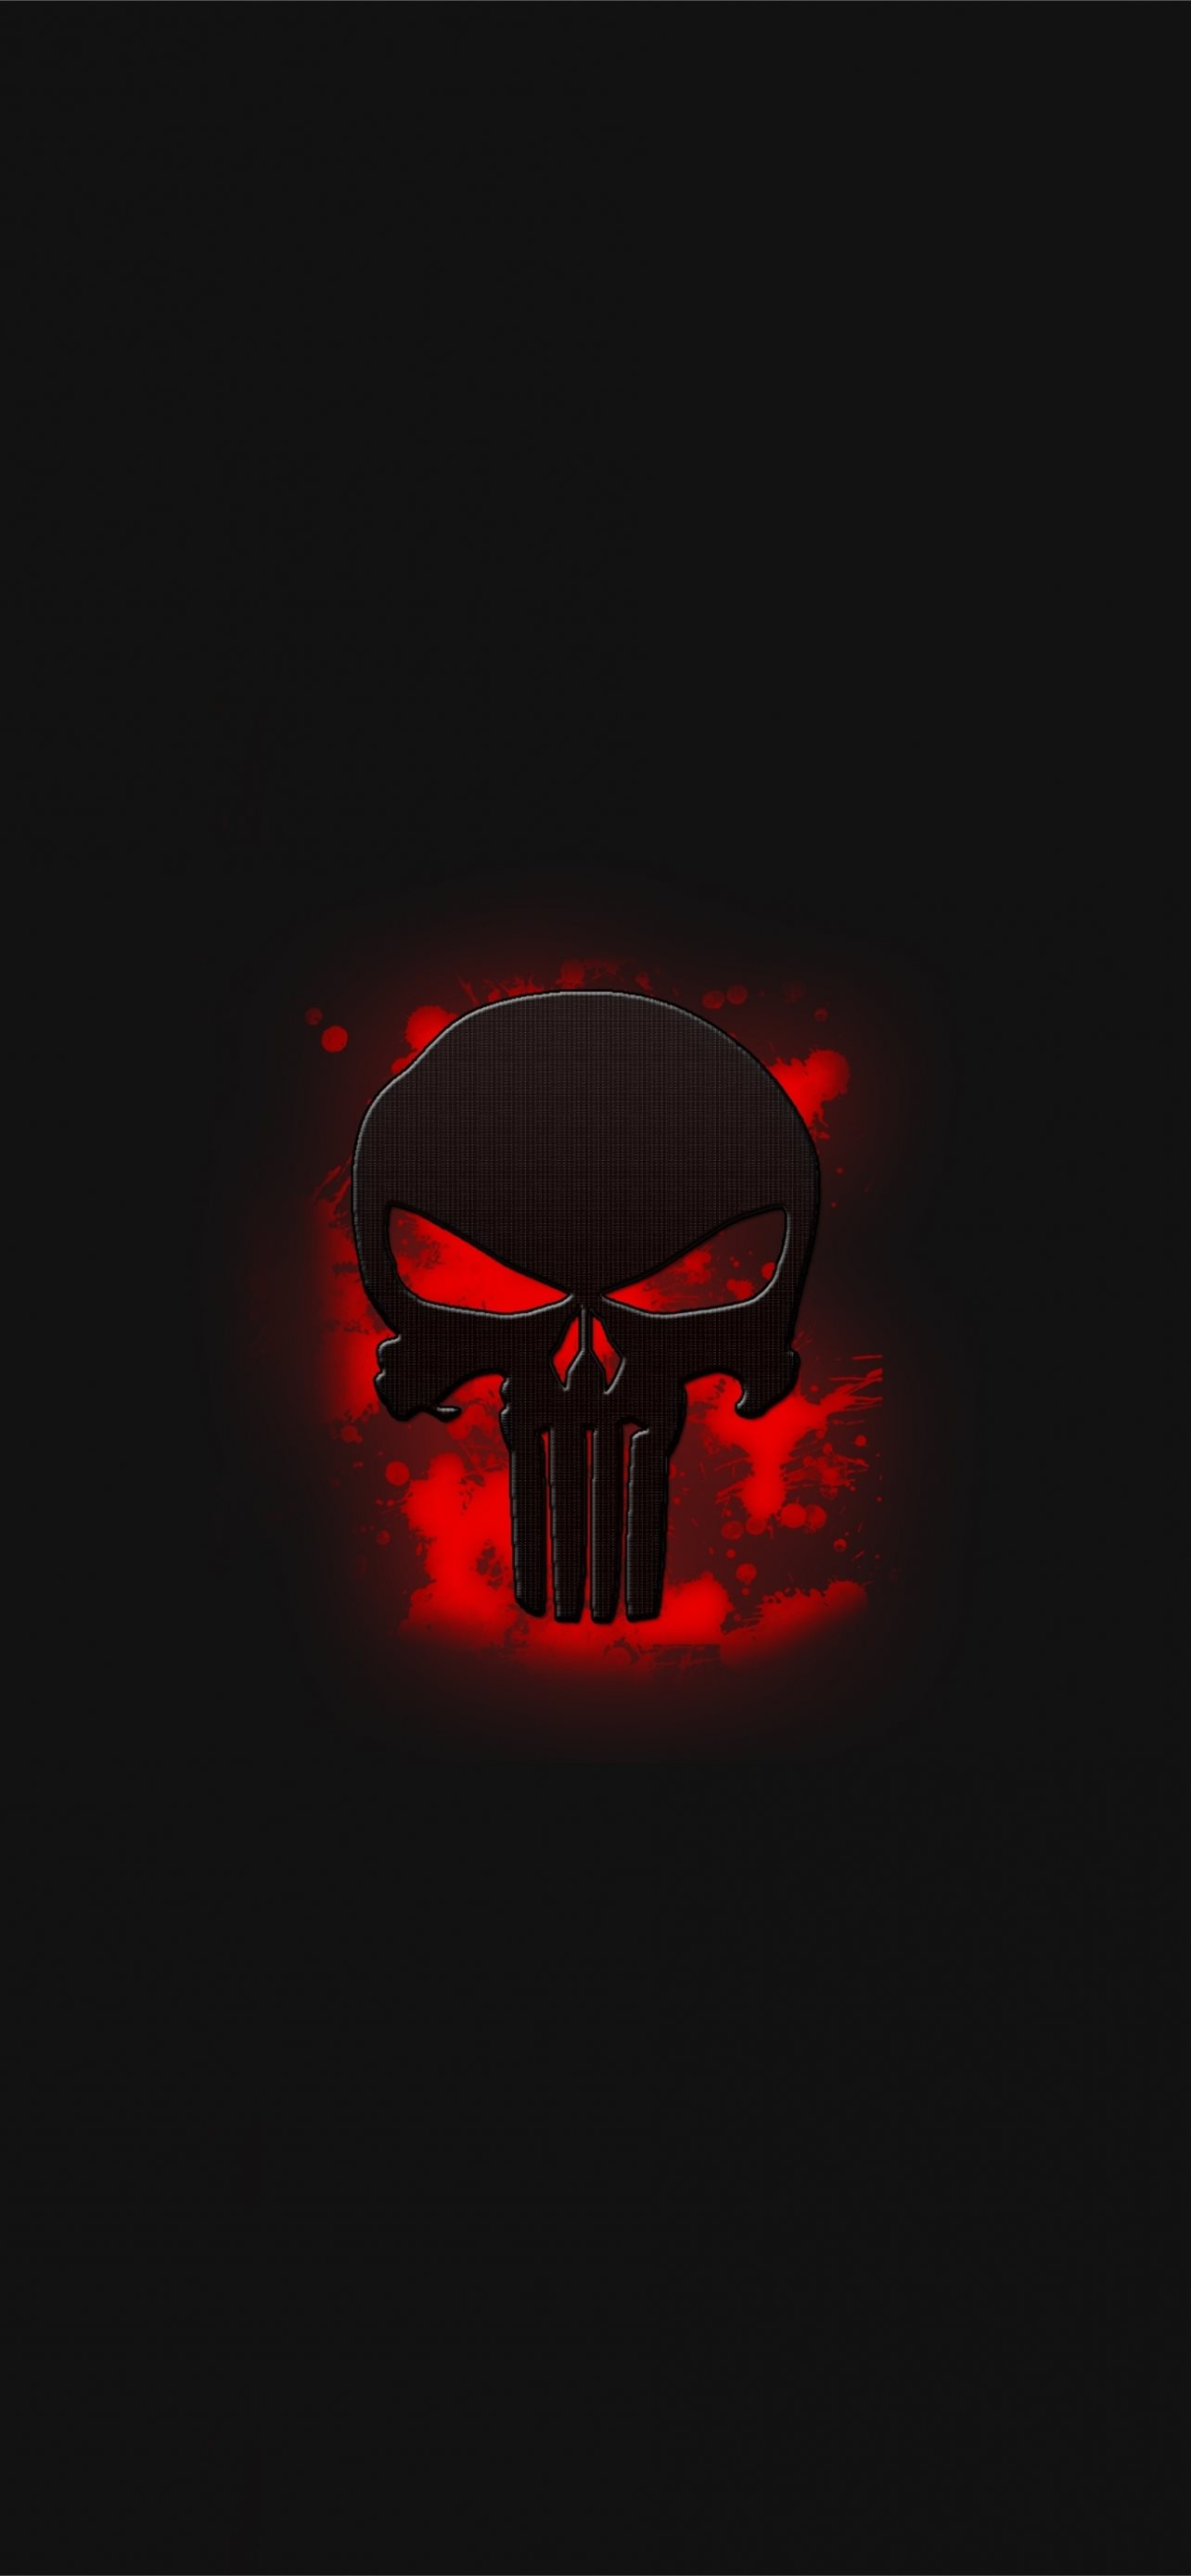 1284x2778 the punisher skull logo art samsung galaxy s8 iPhone Wallpapers Free Download